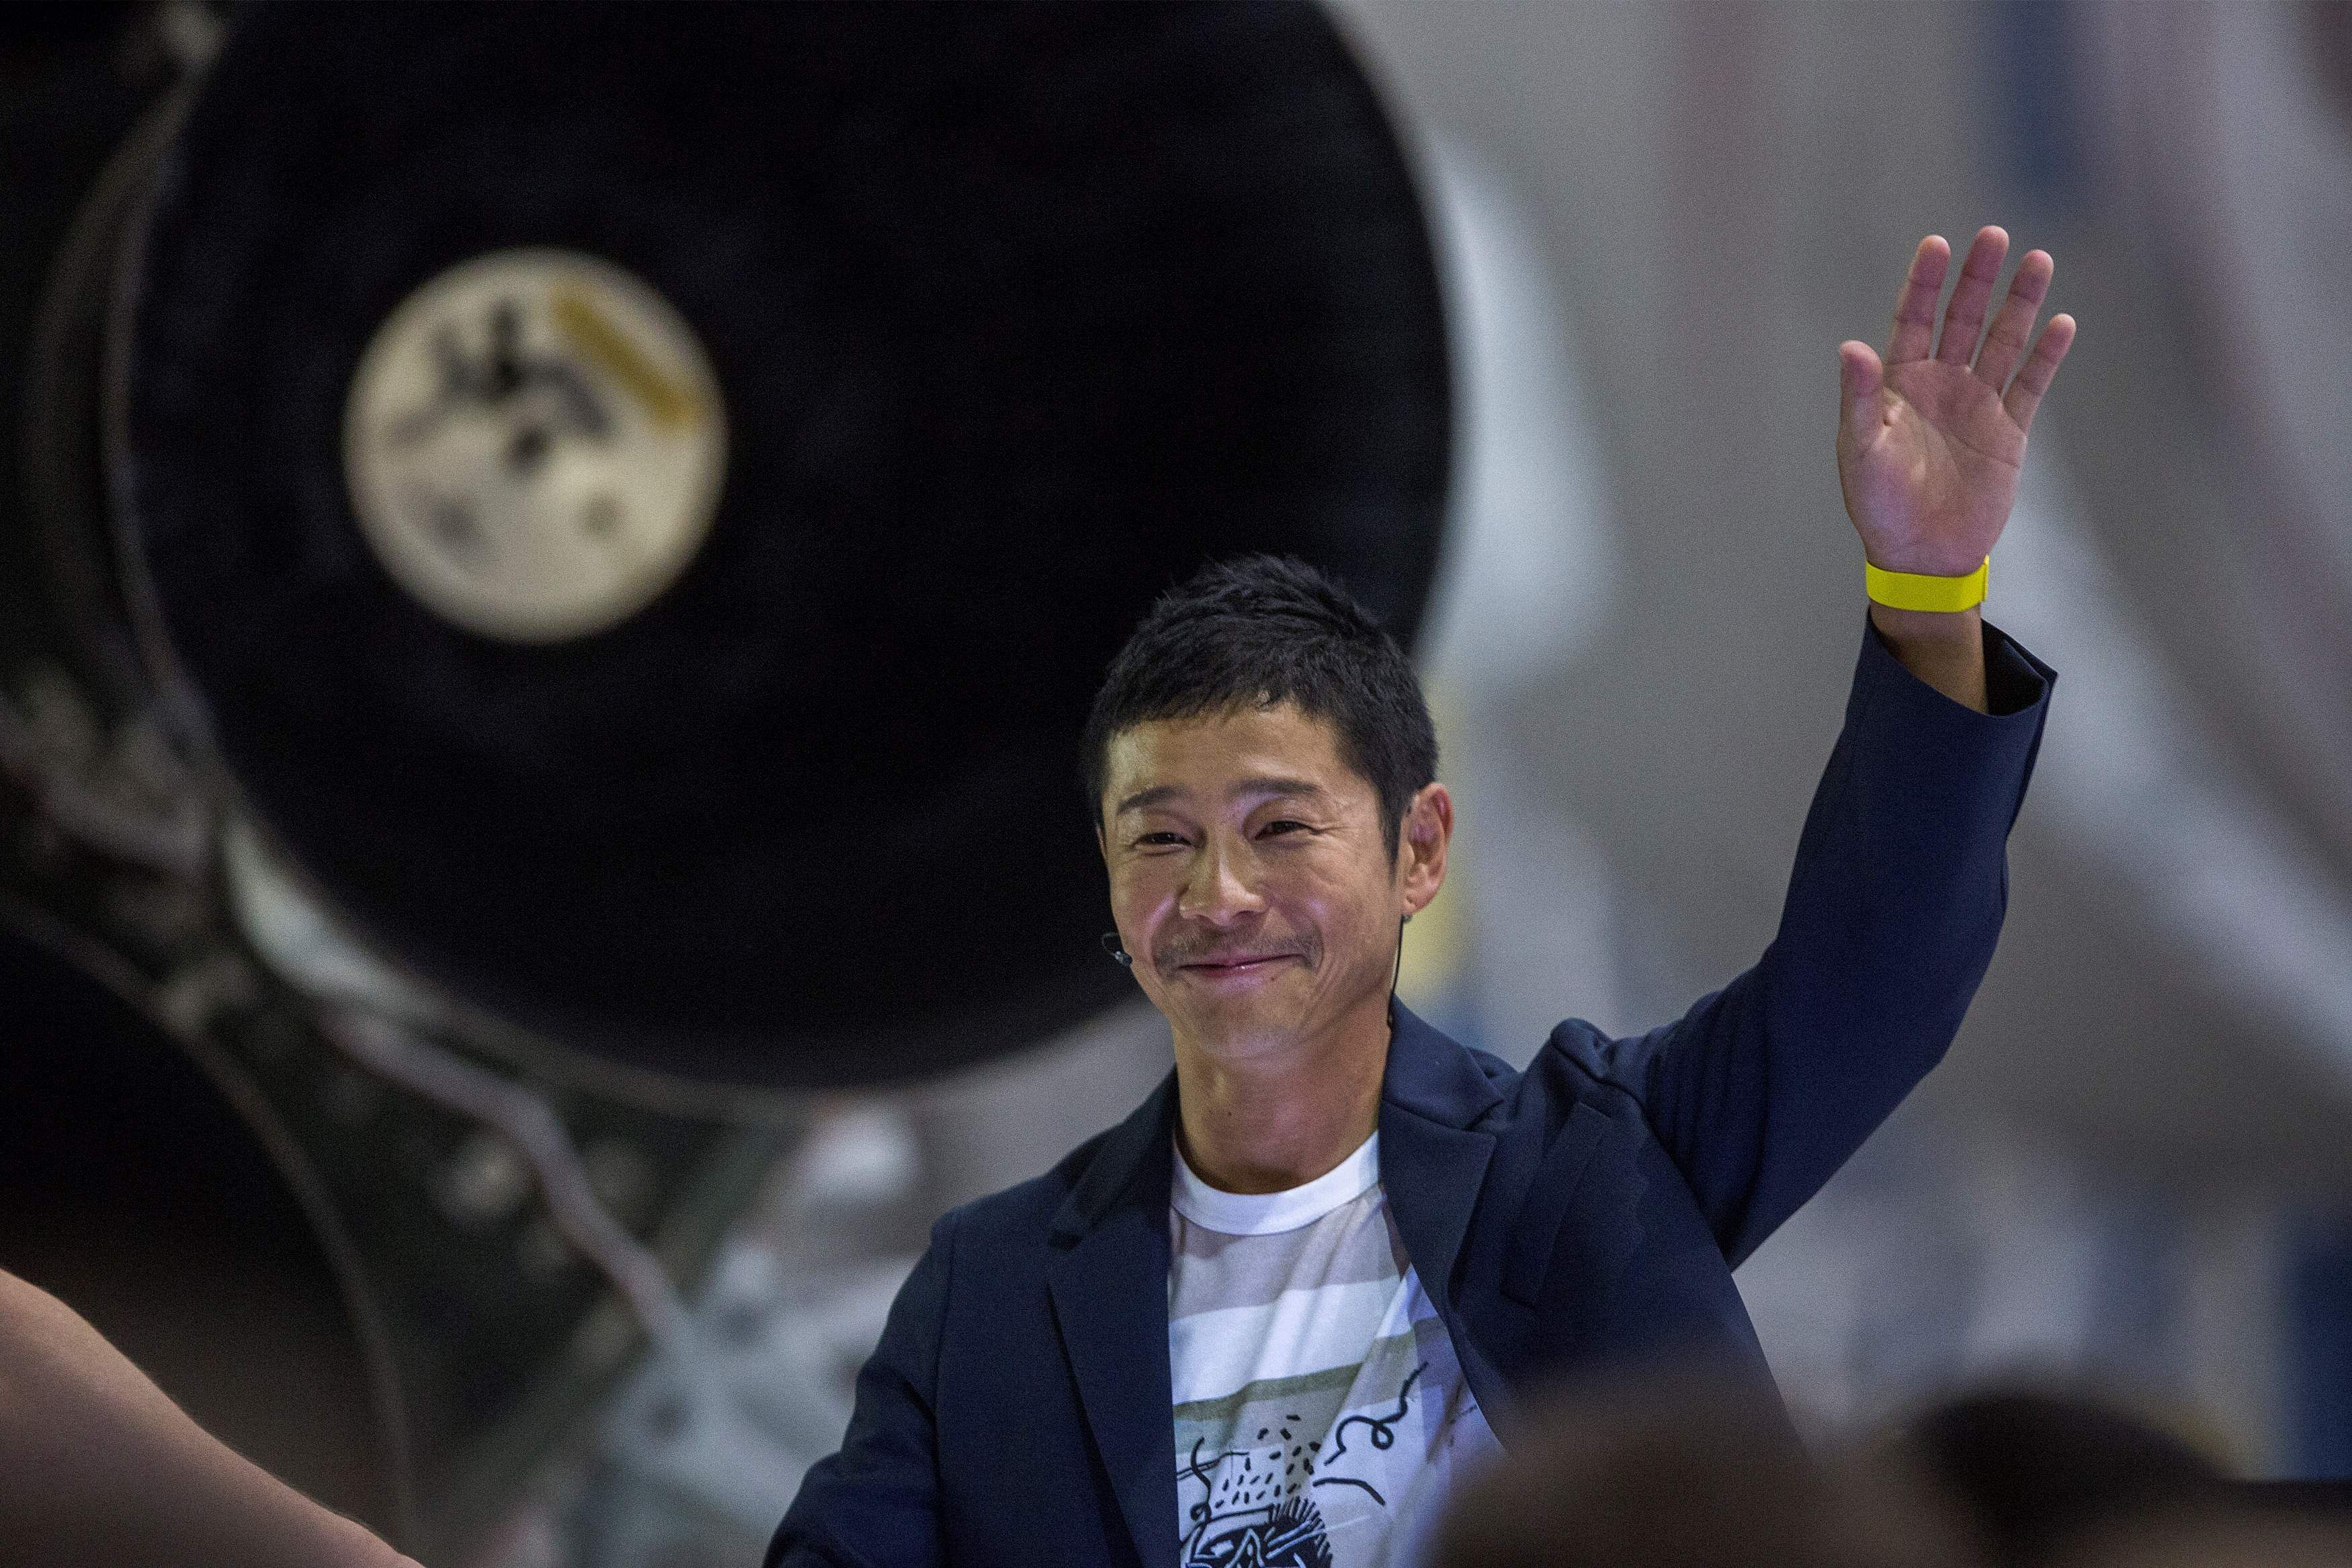 Japanese billionaire Yusaku Maezawa gesturing near a Falcon 9 rocket, during the announcement by Elon Musk for Maezawa to be the first private passenger who will fly around the Moon aboard the SpaceX BFR launch vehicle, at the SpaceX headquarters and rocket factory in Hawthorne, California. Credit: AFP File Photo